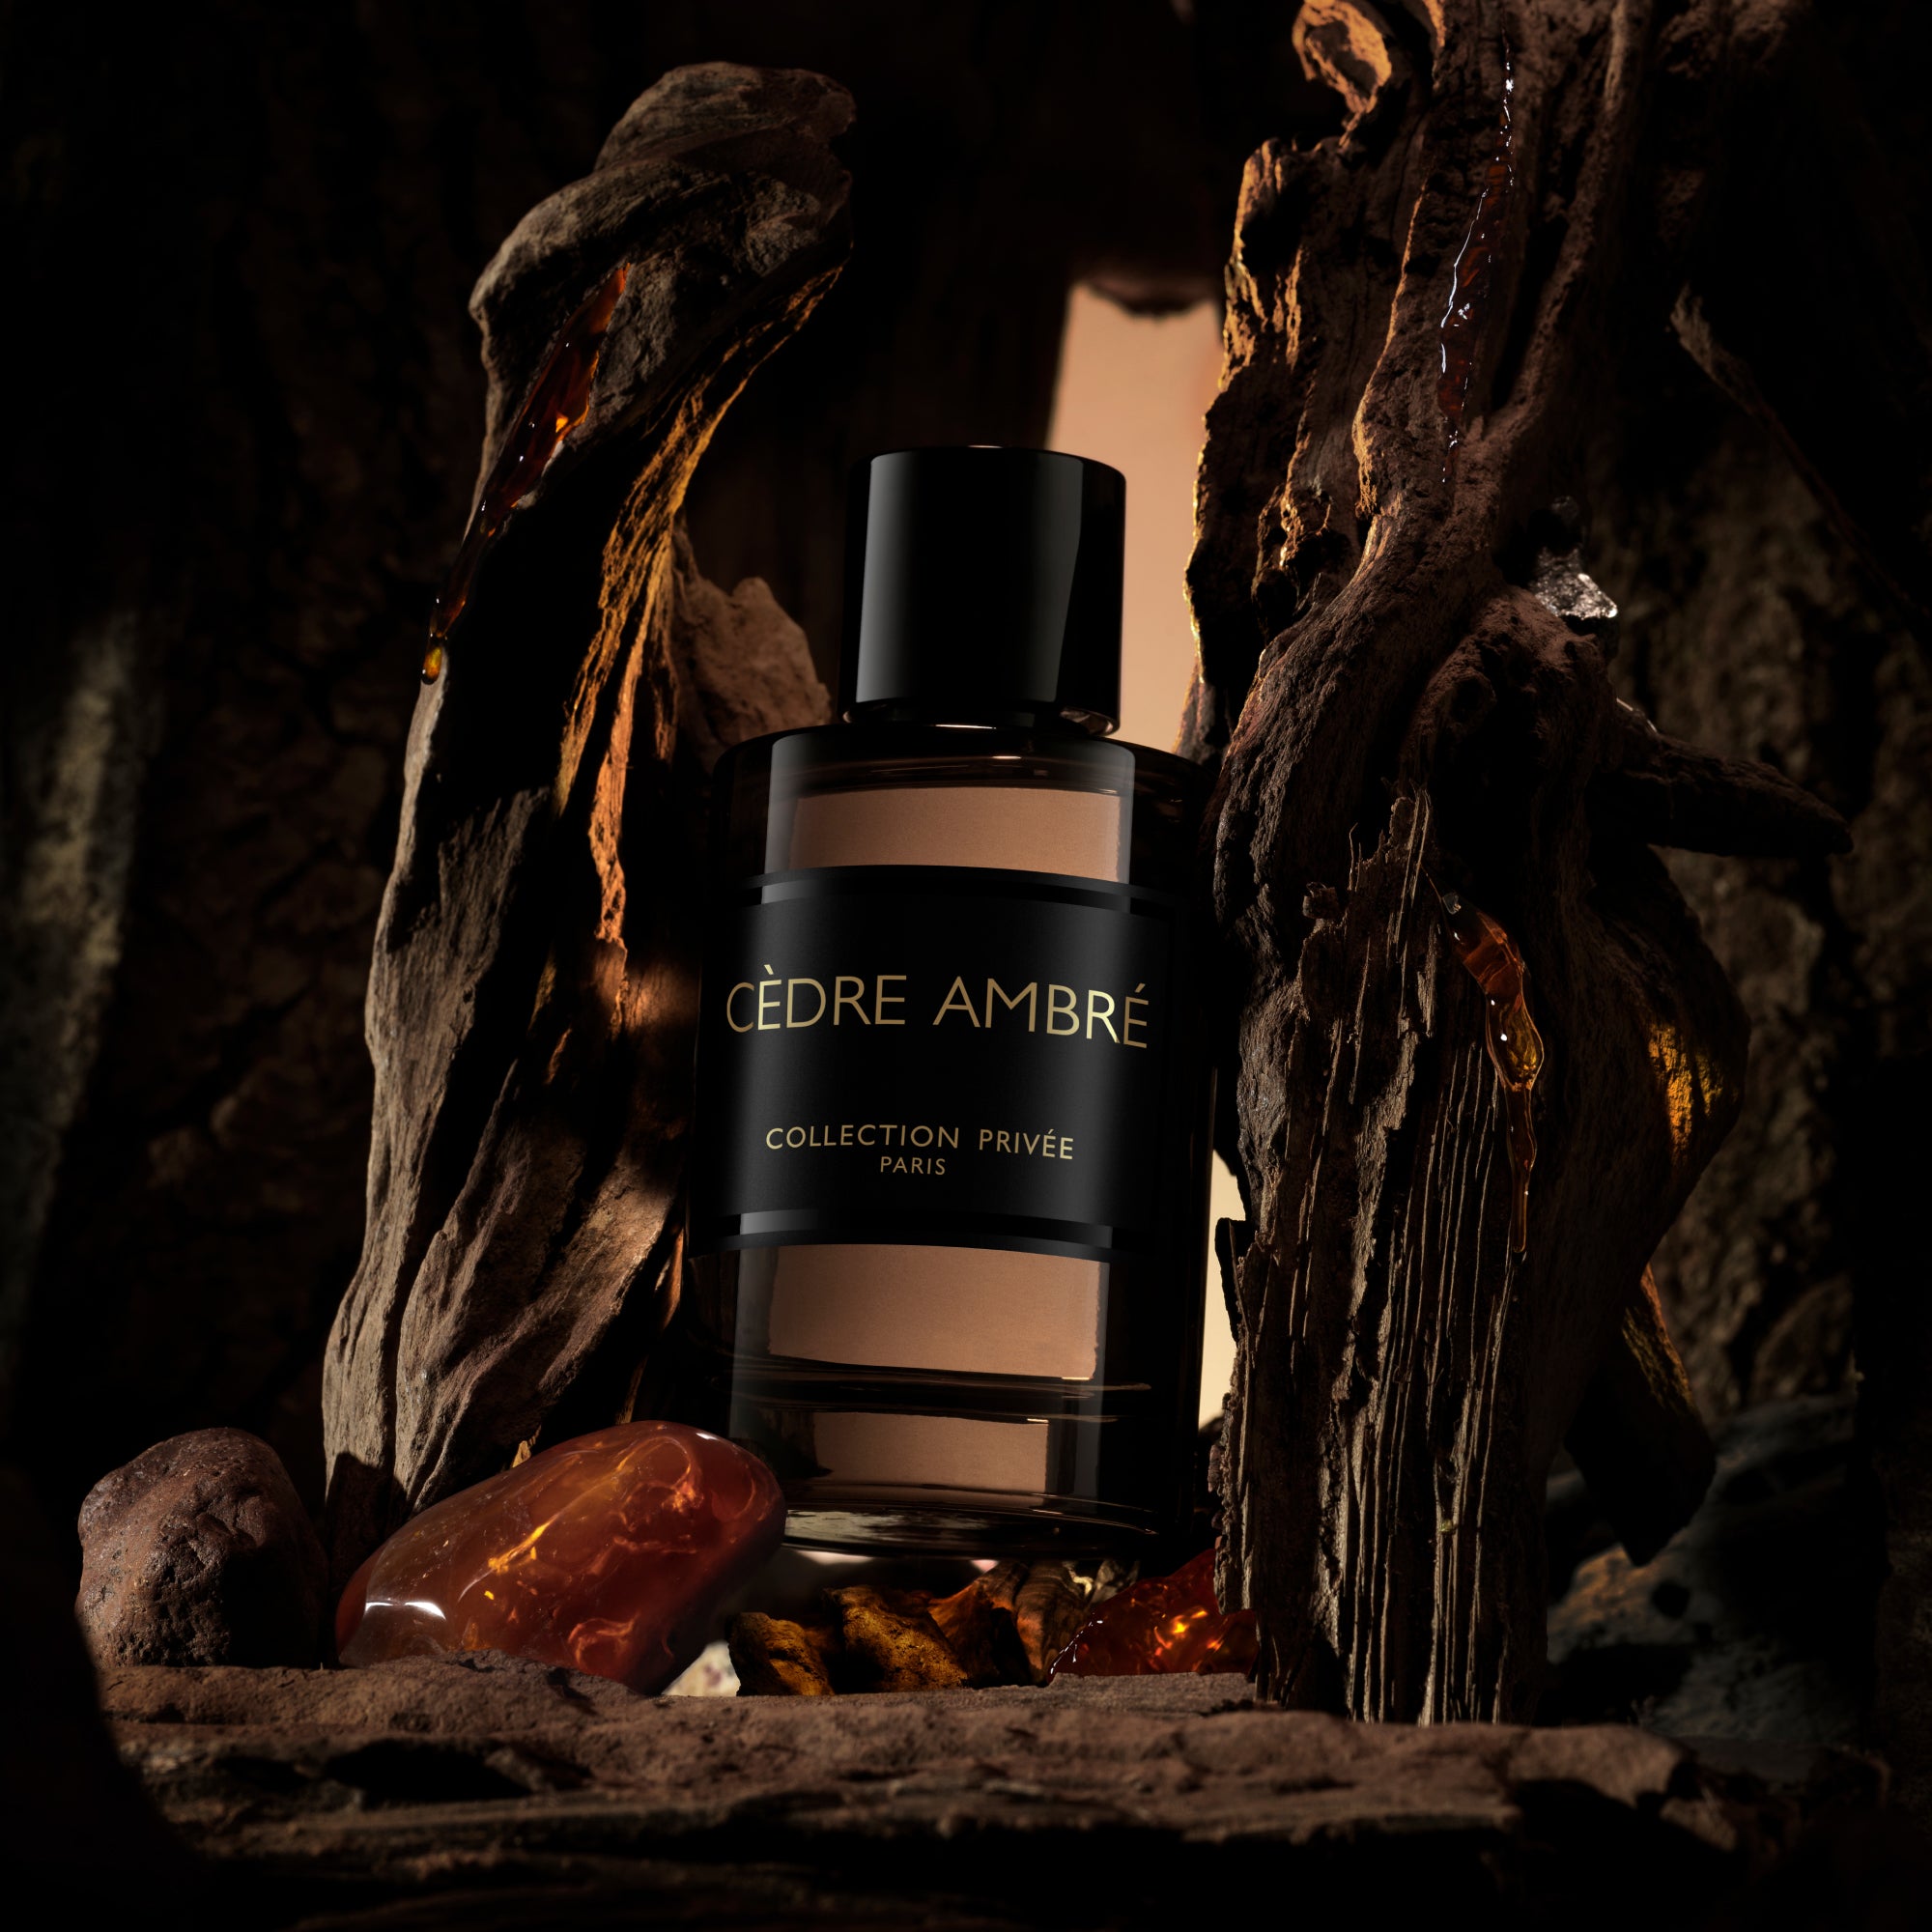 A perfume for men in a dark environment, surrounded by wood, honey and amber stones glowing.